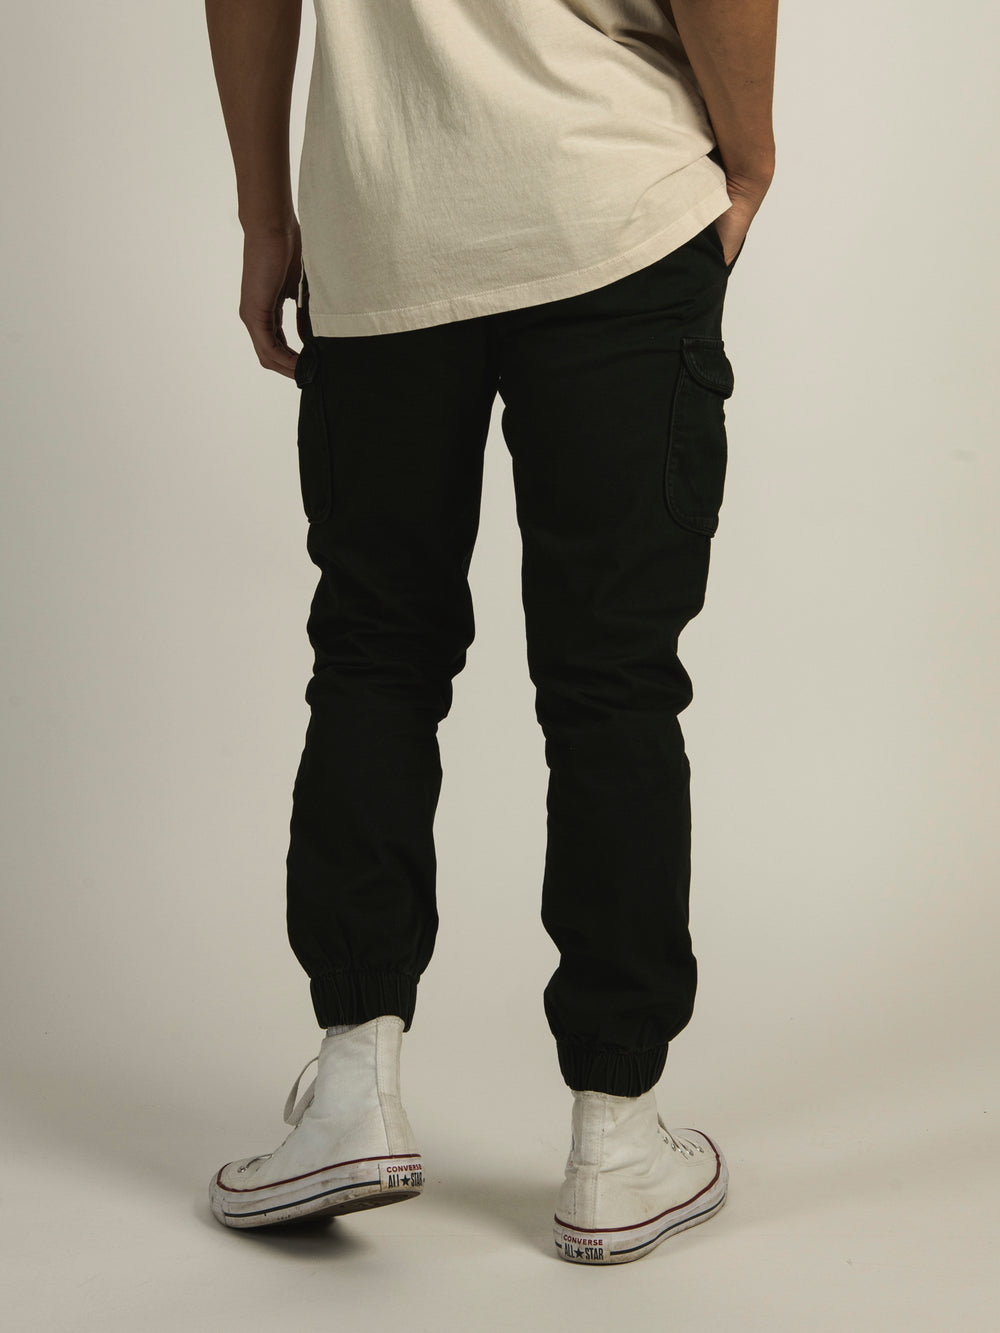 TAINTED CAMDEN CARGO PANT